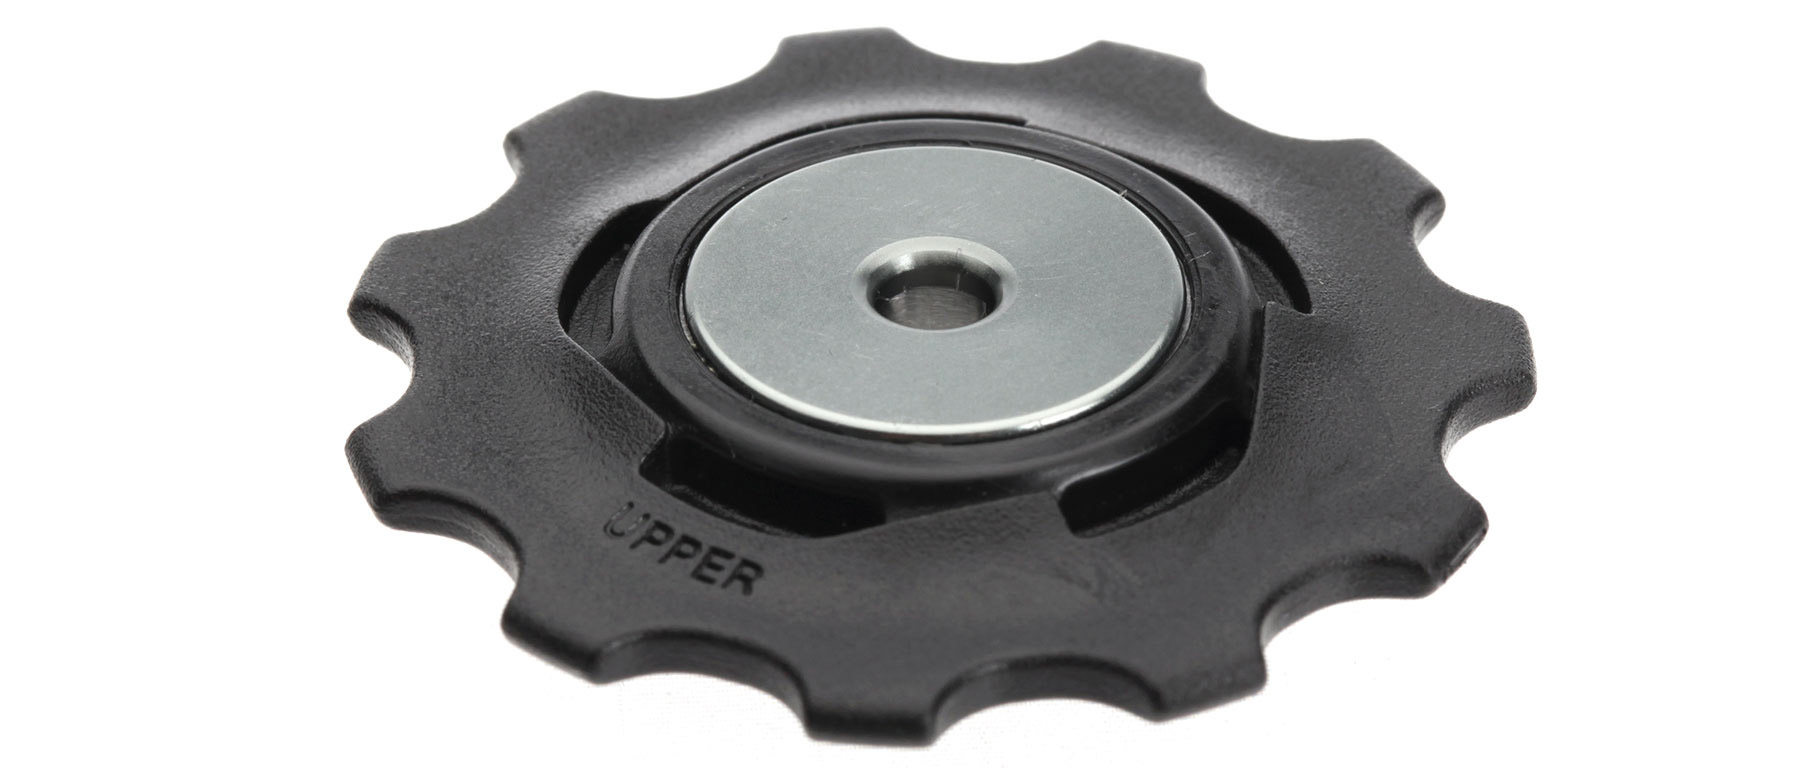 SRAM Force 22-Rival 22 Derailleur Pulley Kit